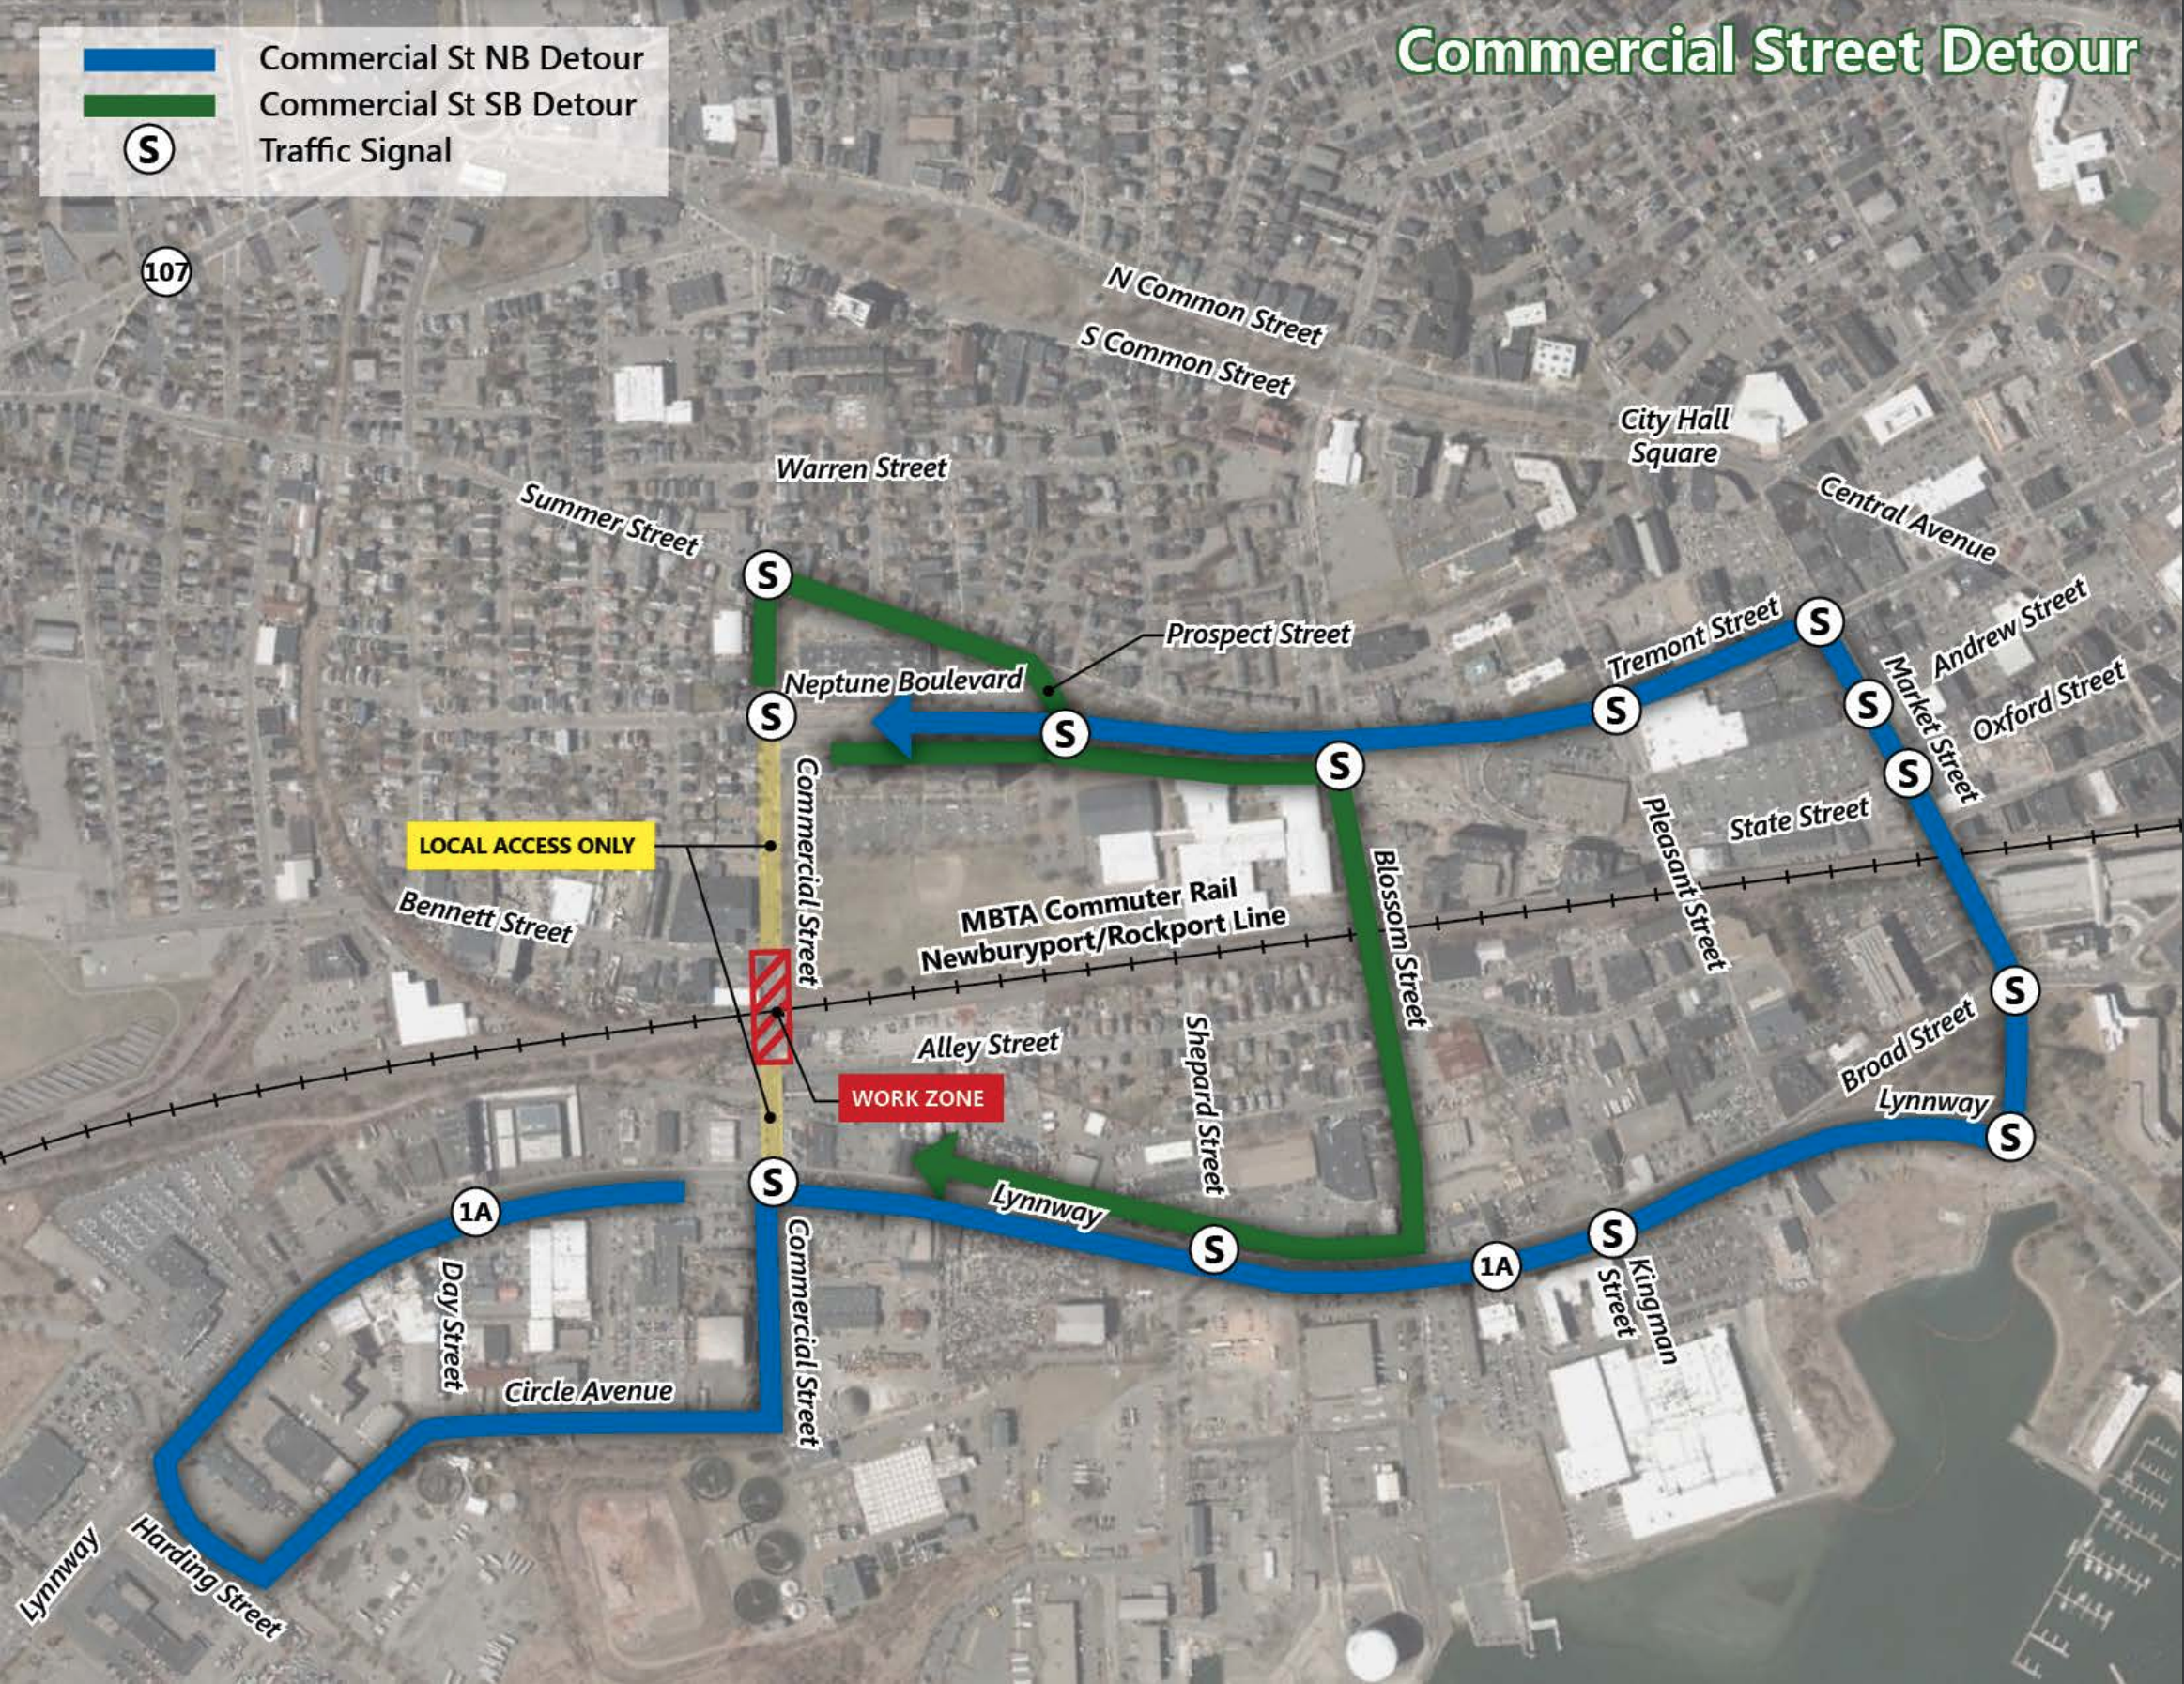 An overhead photo map shows the detour in place from Saturday night, April 9, until Monday morning, April 11. Southbound detour line runs from Commercial and Summer streets down Summer to Blossom to Lynnway back to Commercial. Northbound detour runs along Lynnway to Market to Tremont.